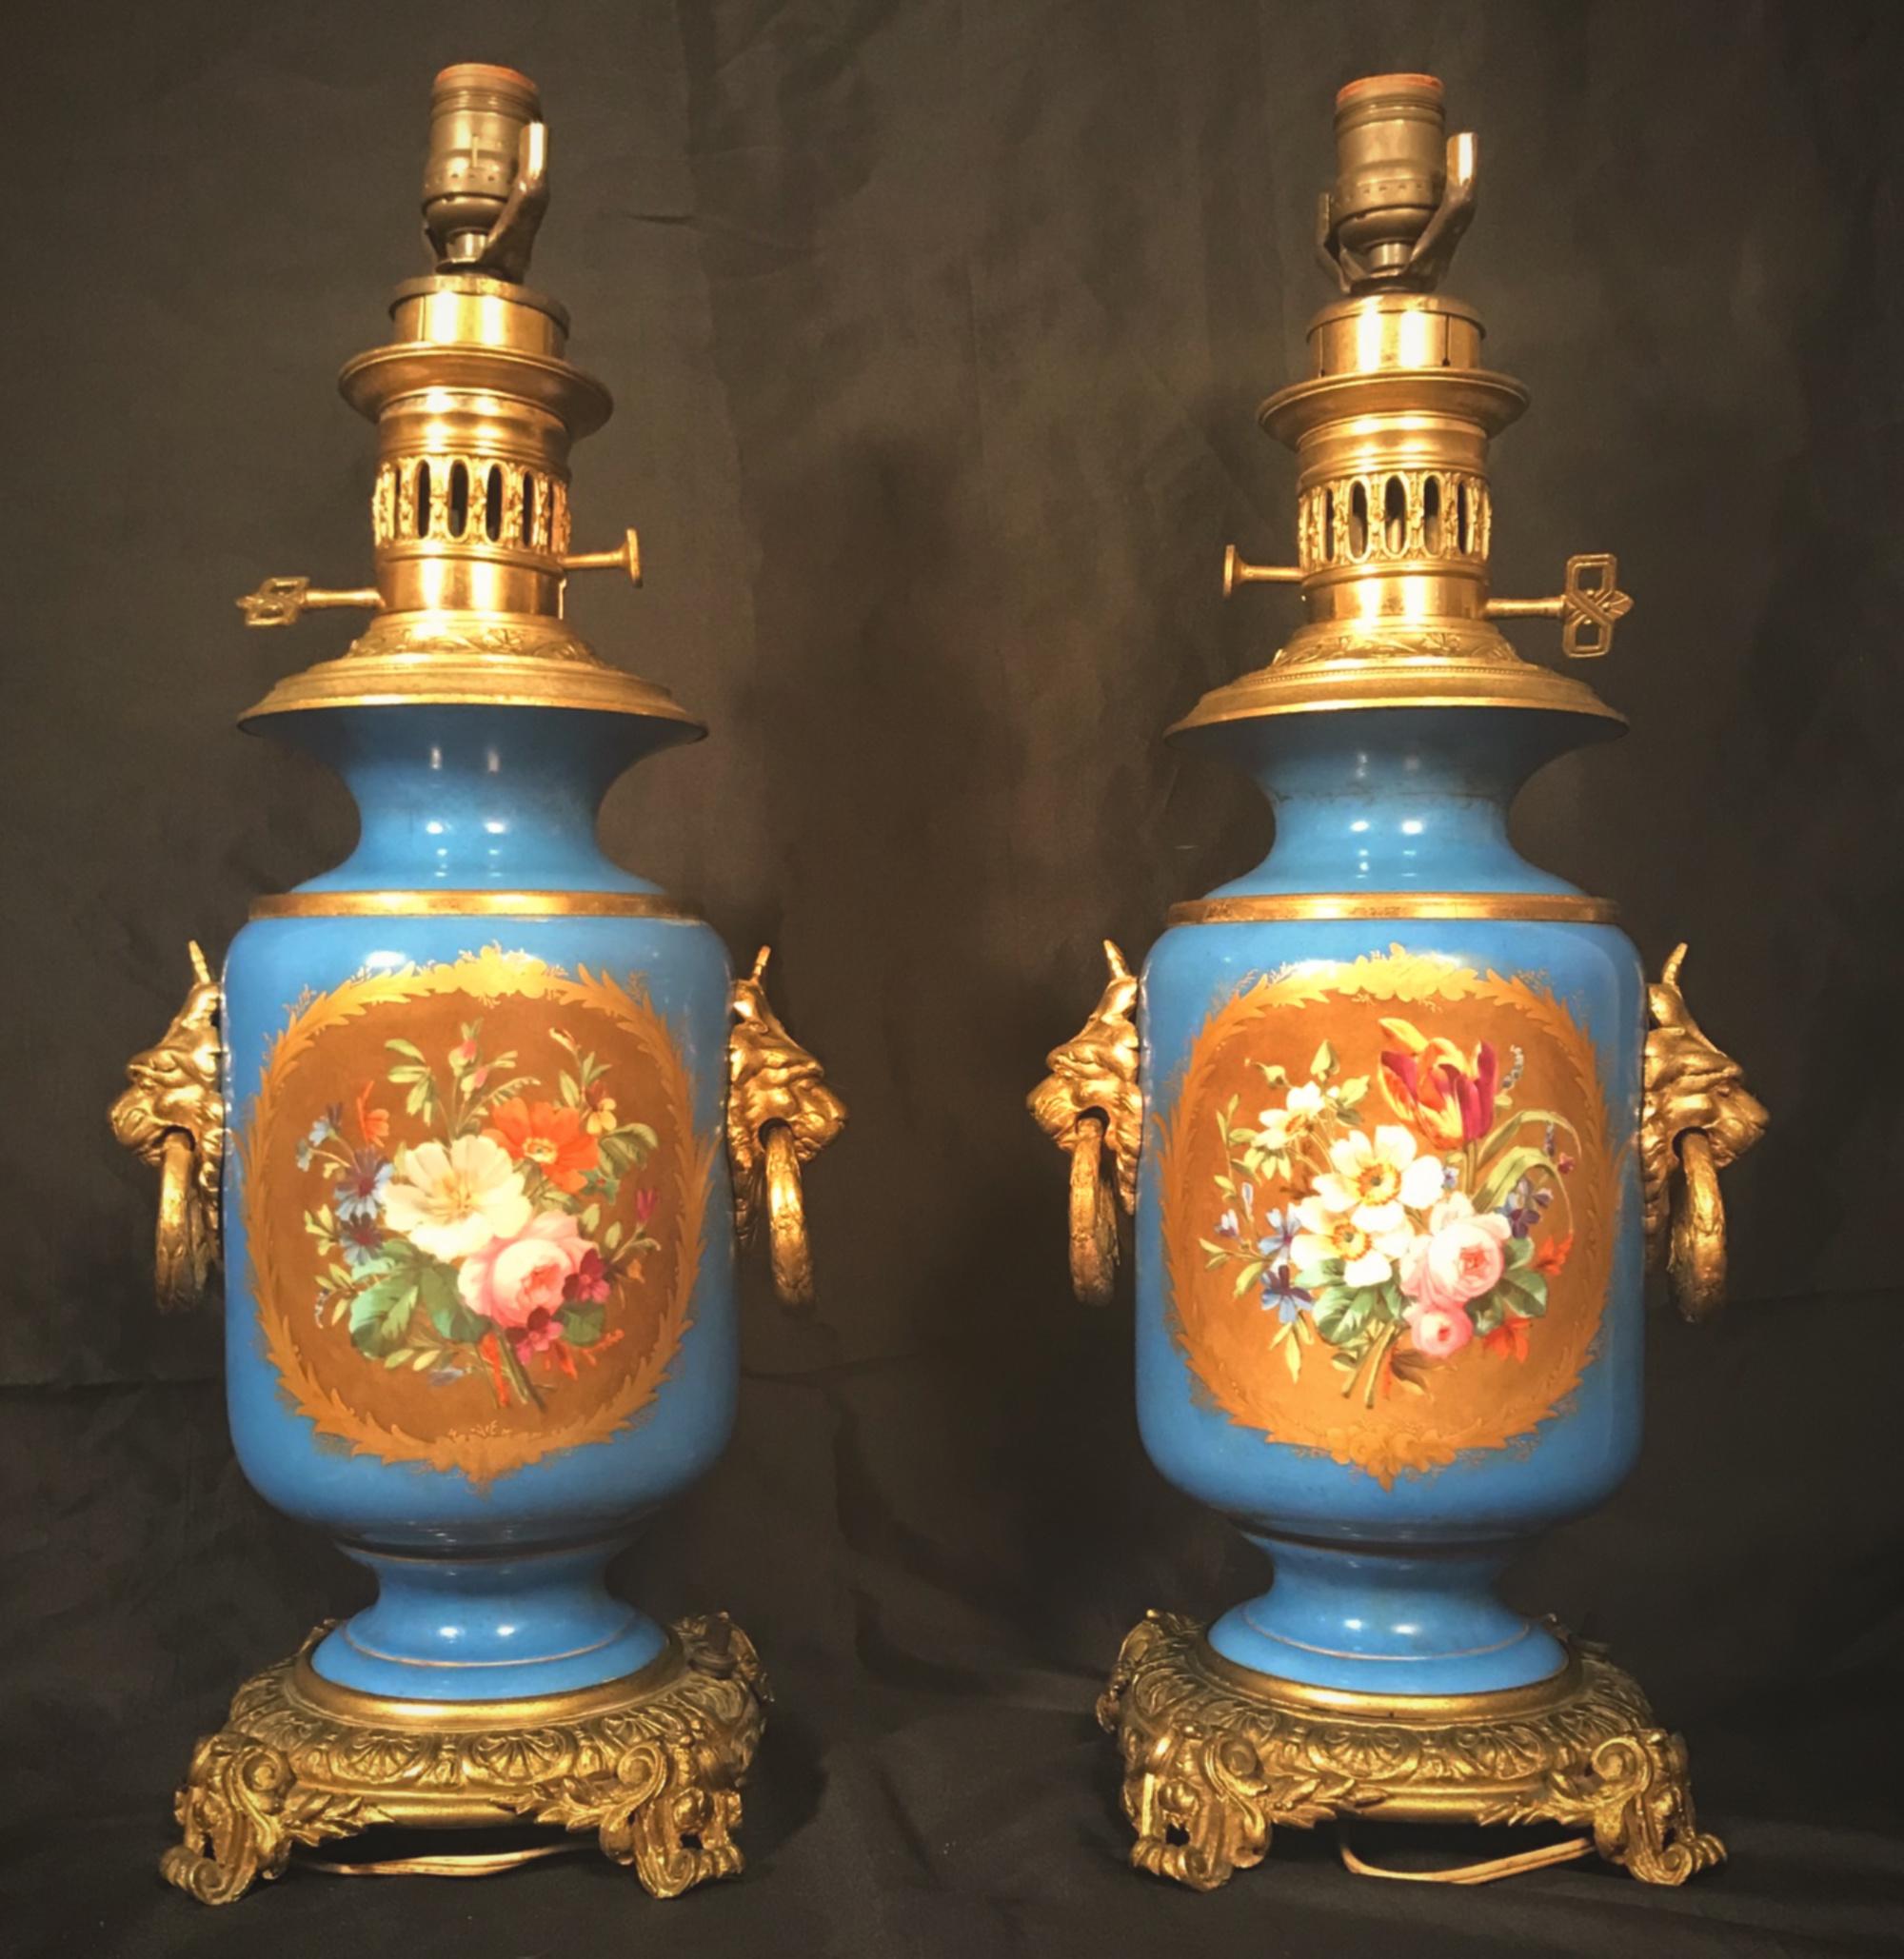 Pair of Louis XVI Style French Sevres blue porcelain hand painted ormolu-mounted oil lamps

This is an exquisite large pair of Sevres blue 19th century enamel hand painted and mounted twin handle table oil lamps. Each front of the Watteau style